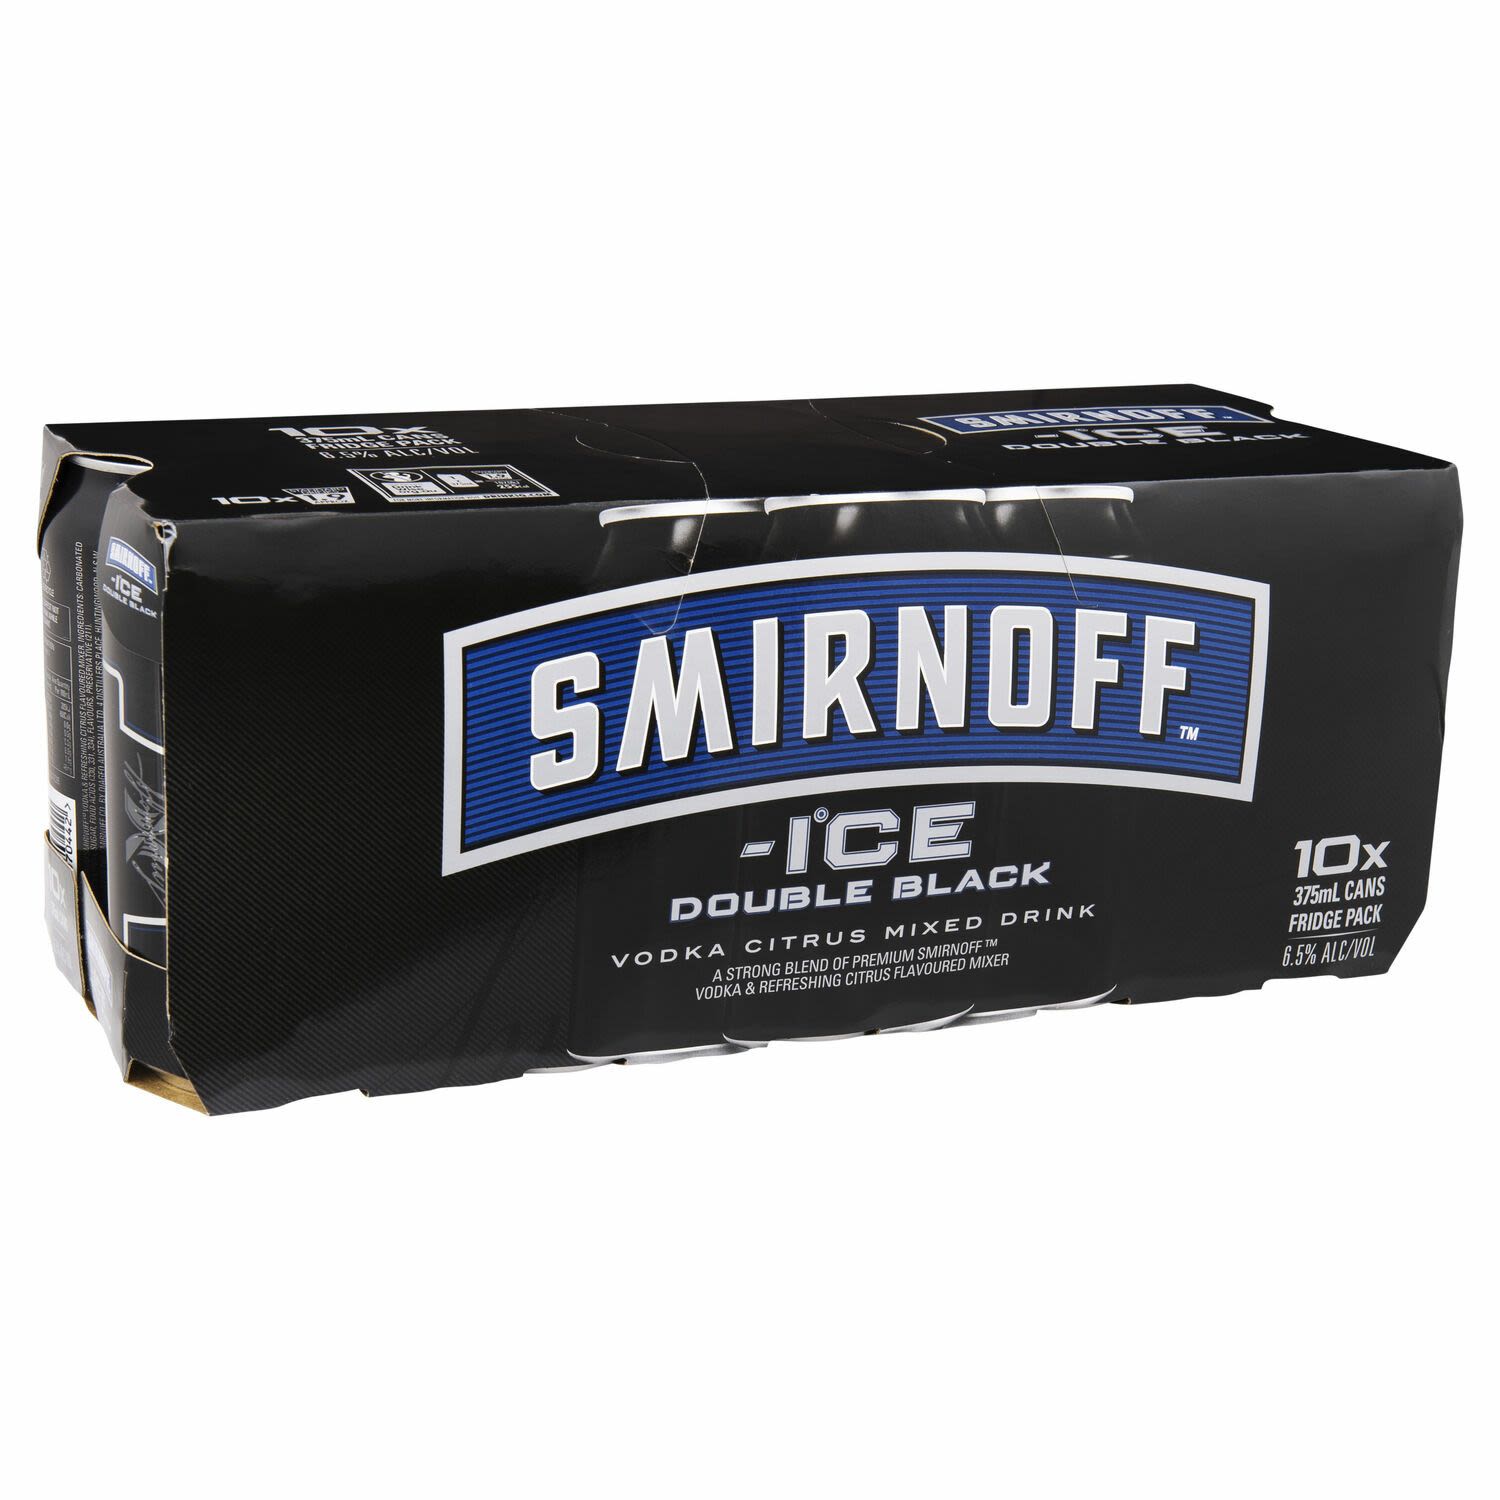 With an extra strong blend of Smirnoff Vodka, Smirnoff Ice Double Black combines a tangy citrus flavoured soda to create a refreshing drink<br /> <br />Alcohol Volume: 6.50%<br /><br />Pack Format: 10 Pack<br /><br />Standard Drinks: 1.9</br /><br />Pack Type: Can<br />